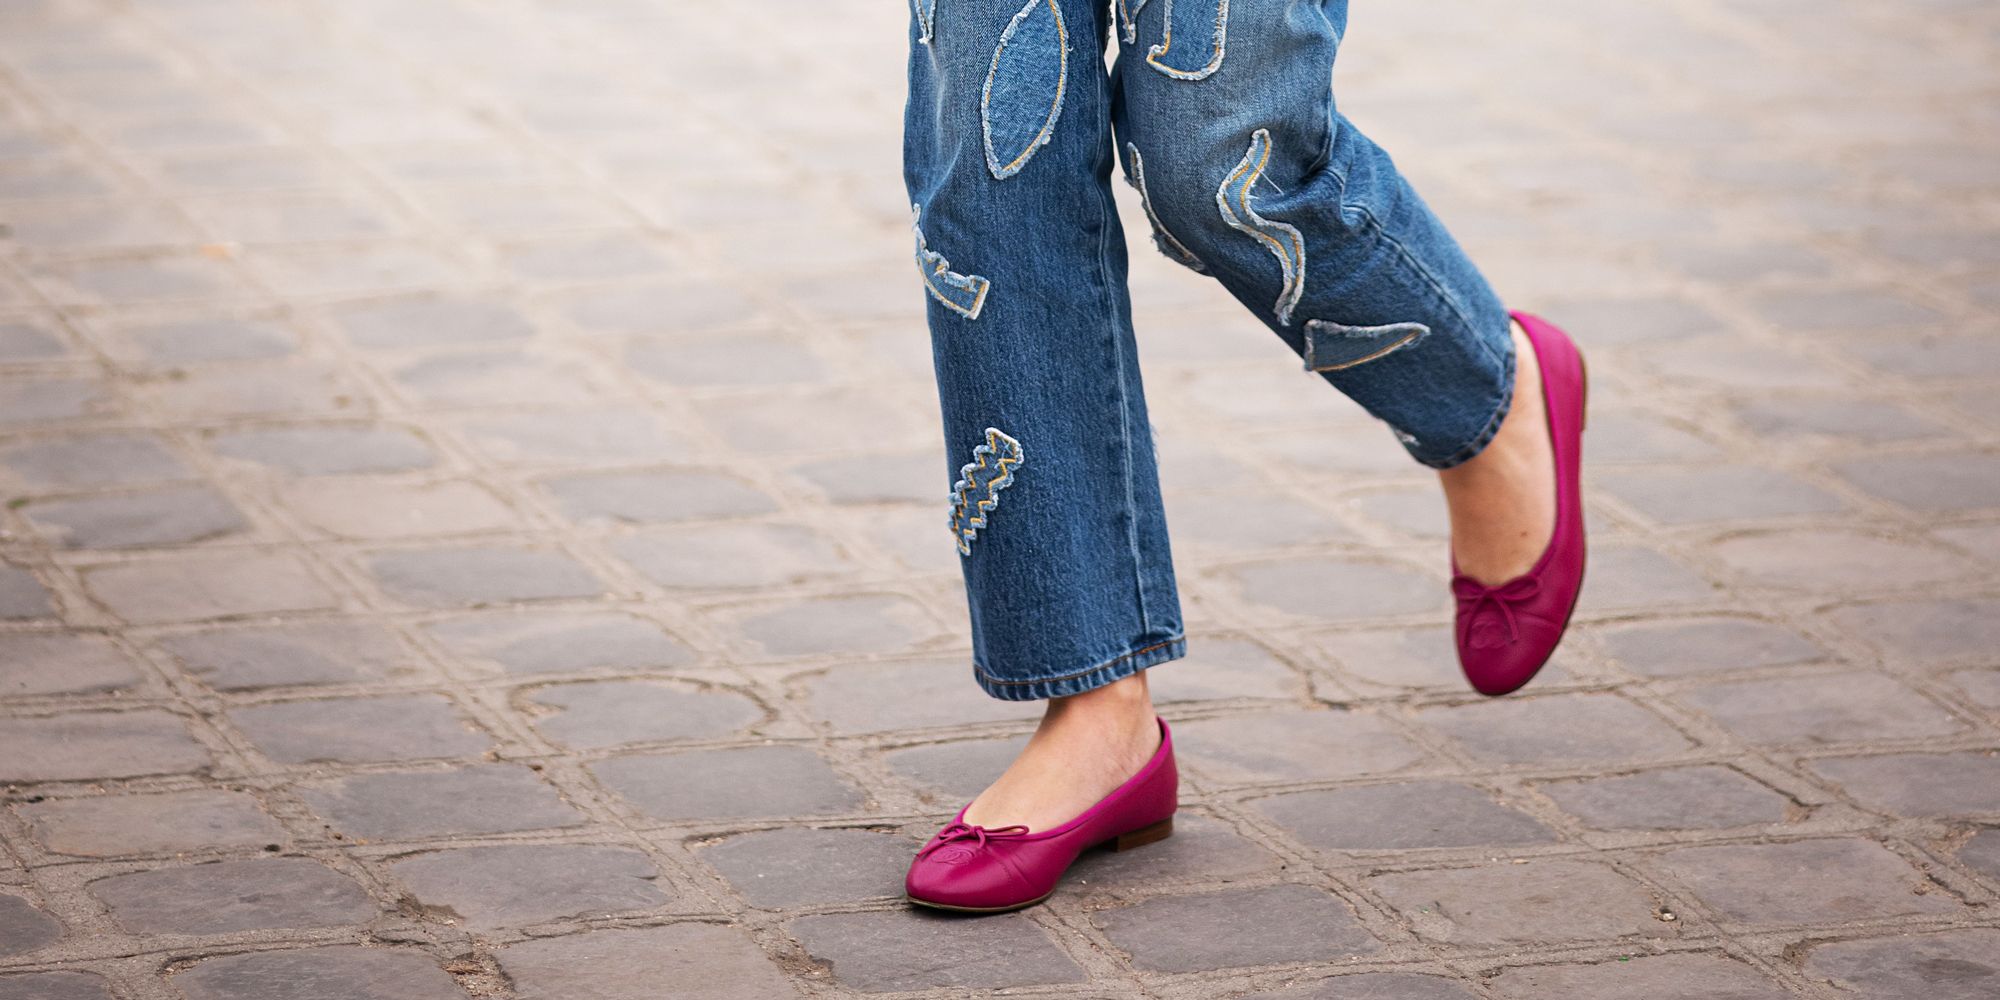 10 Square-Toed Flats That Are Trendy and Comfortable